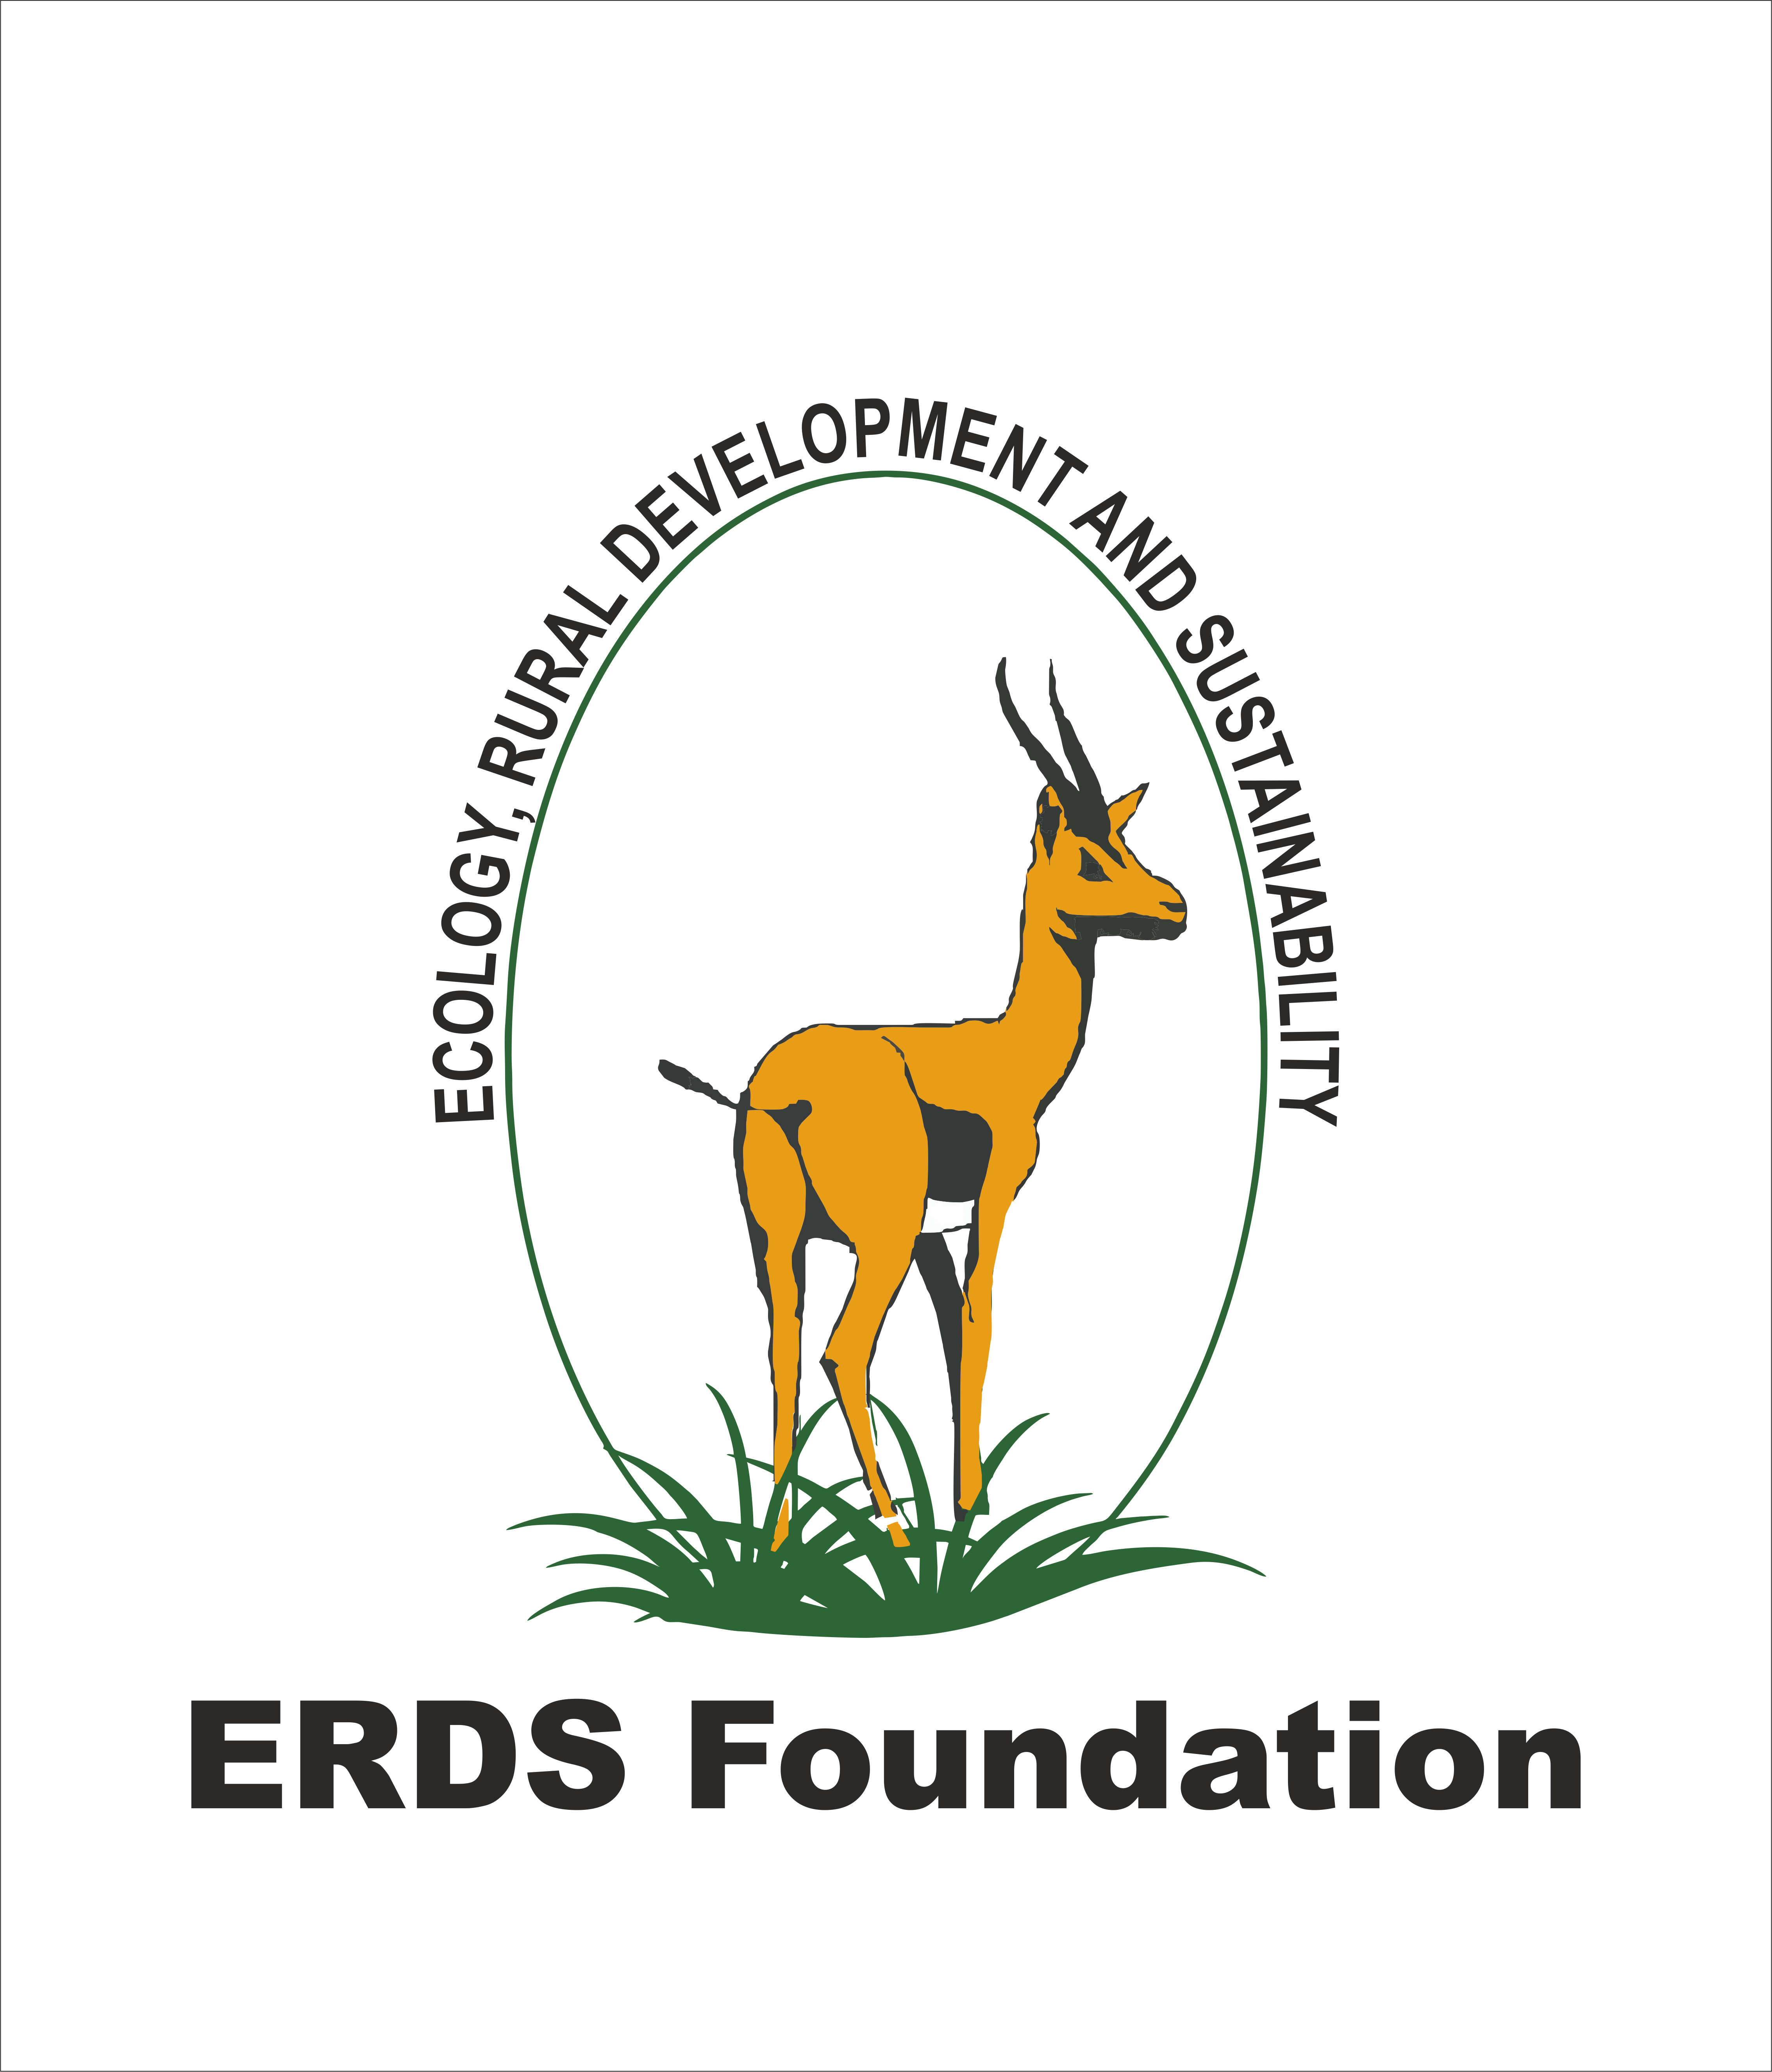 The ERDS Foundation, Sr. Scientist, Founder and Managing Trustee at The ERDS Foundation